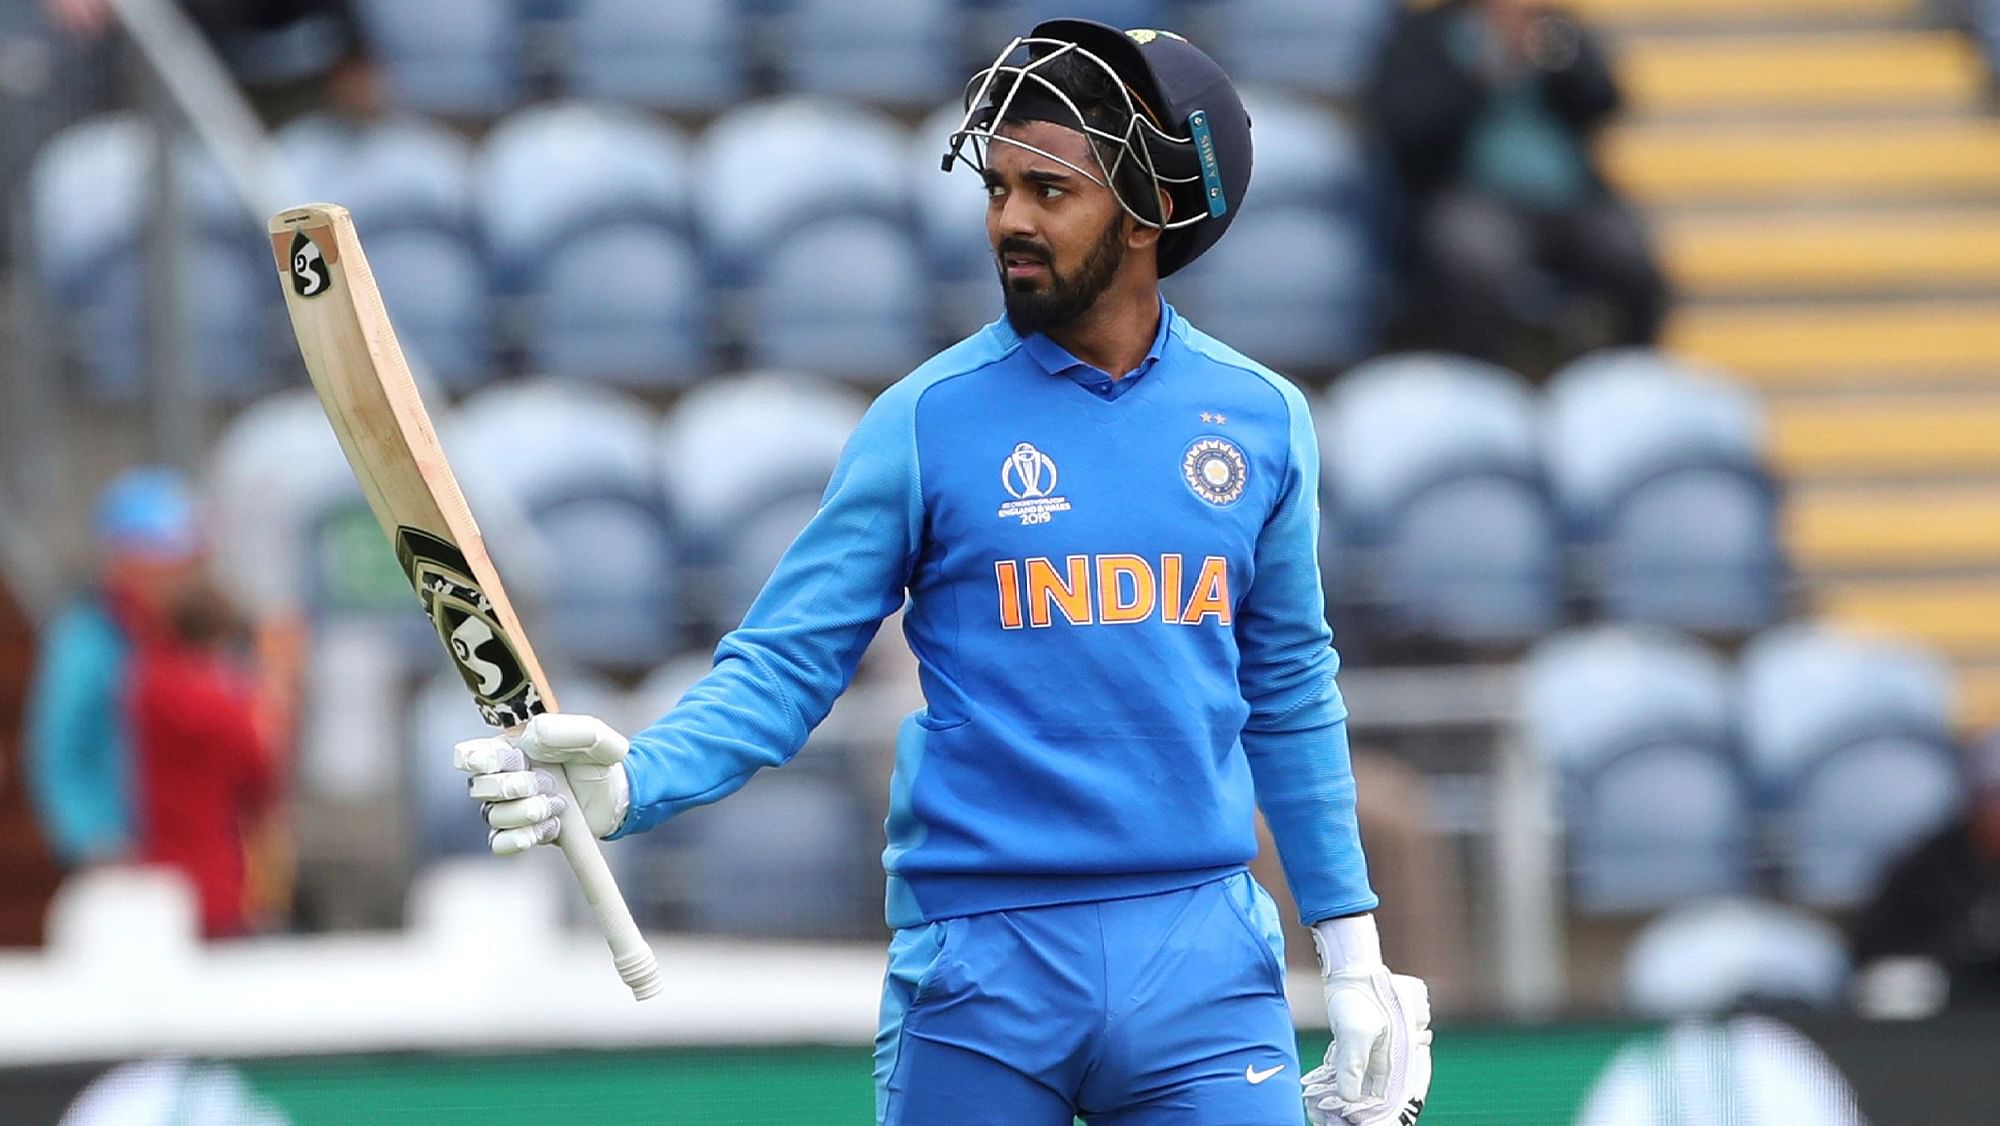 KL Rahul scored 108 off 99 balls against Bangladesh in the second warm-up match in Cardiff on Tuesday.